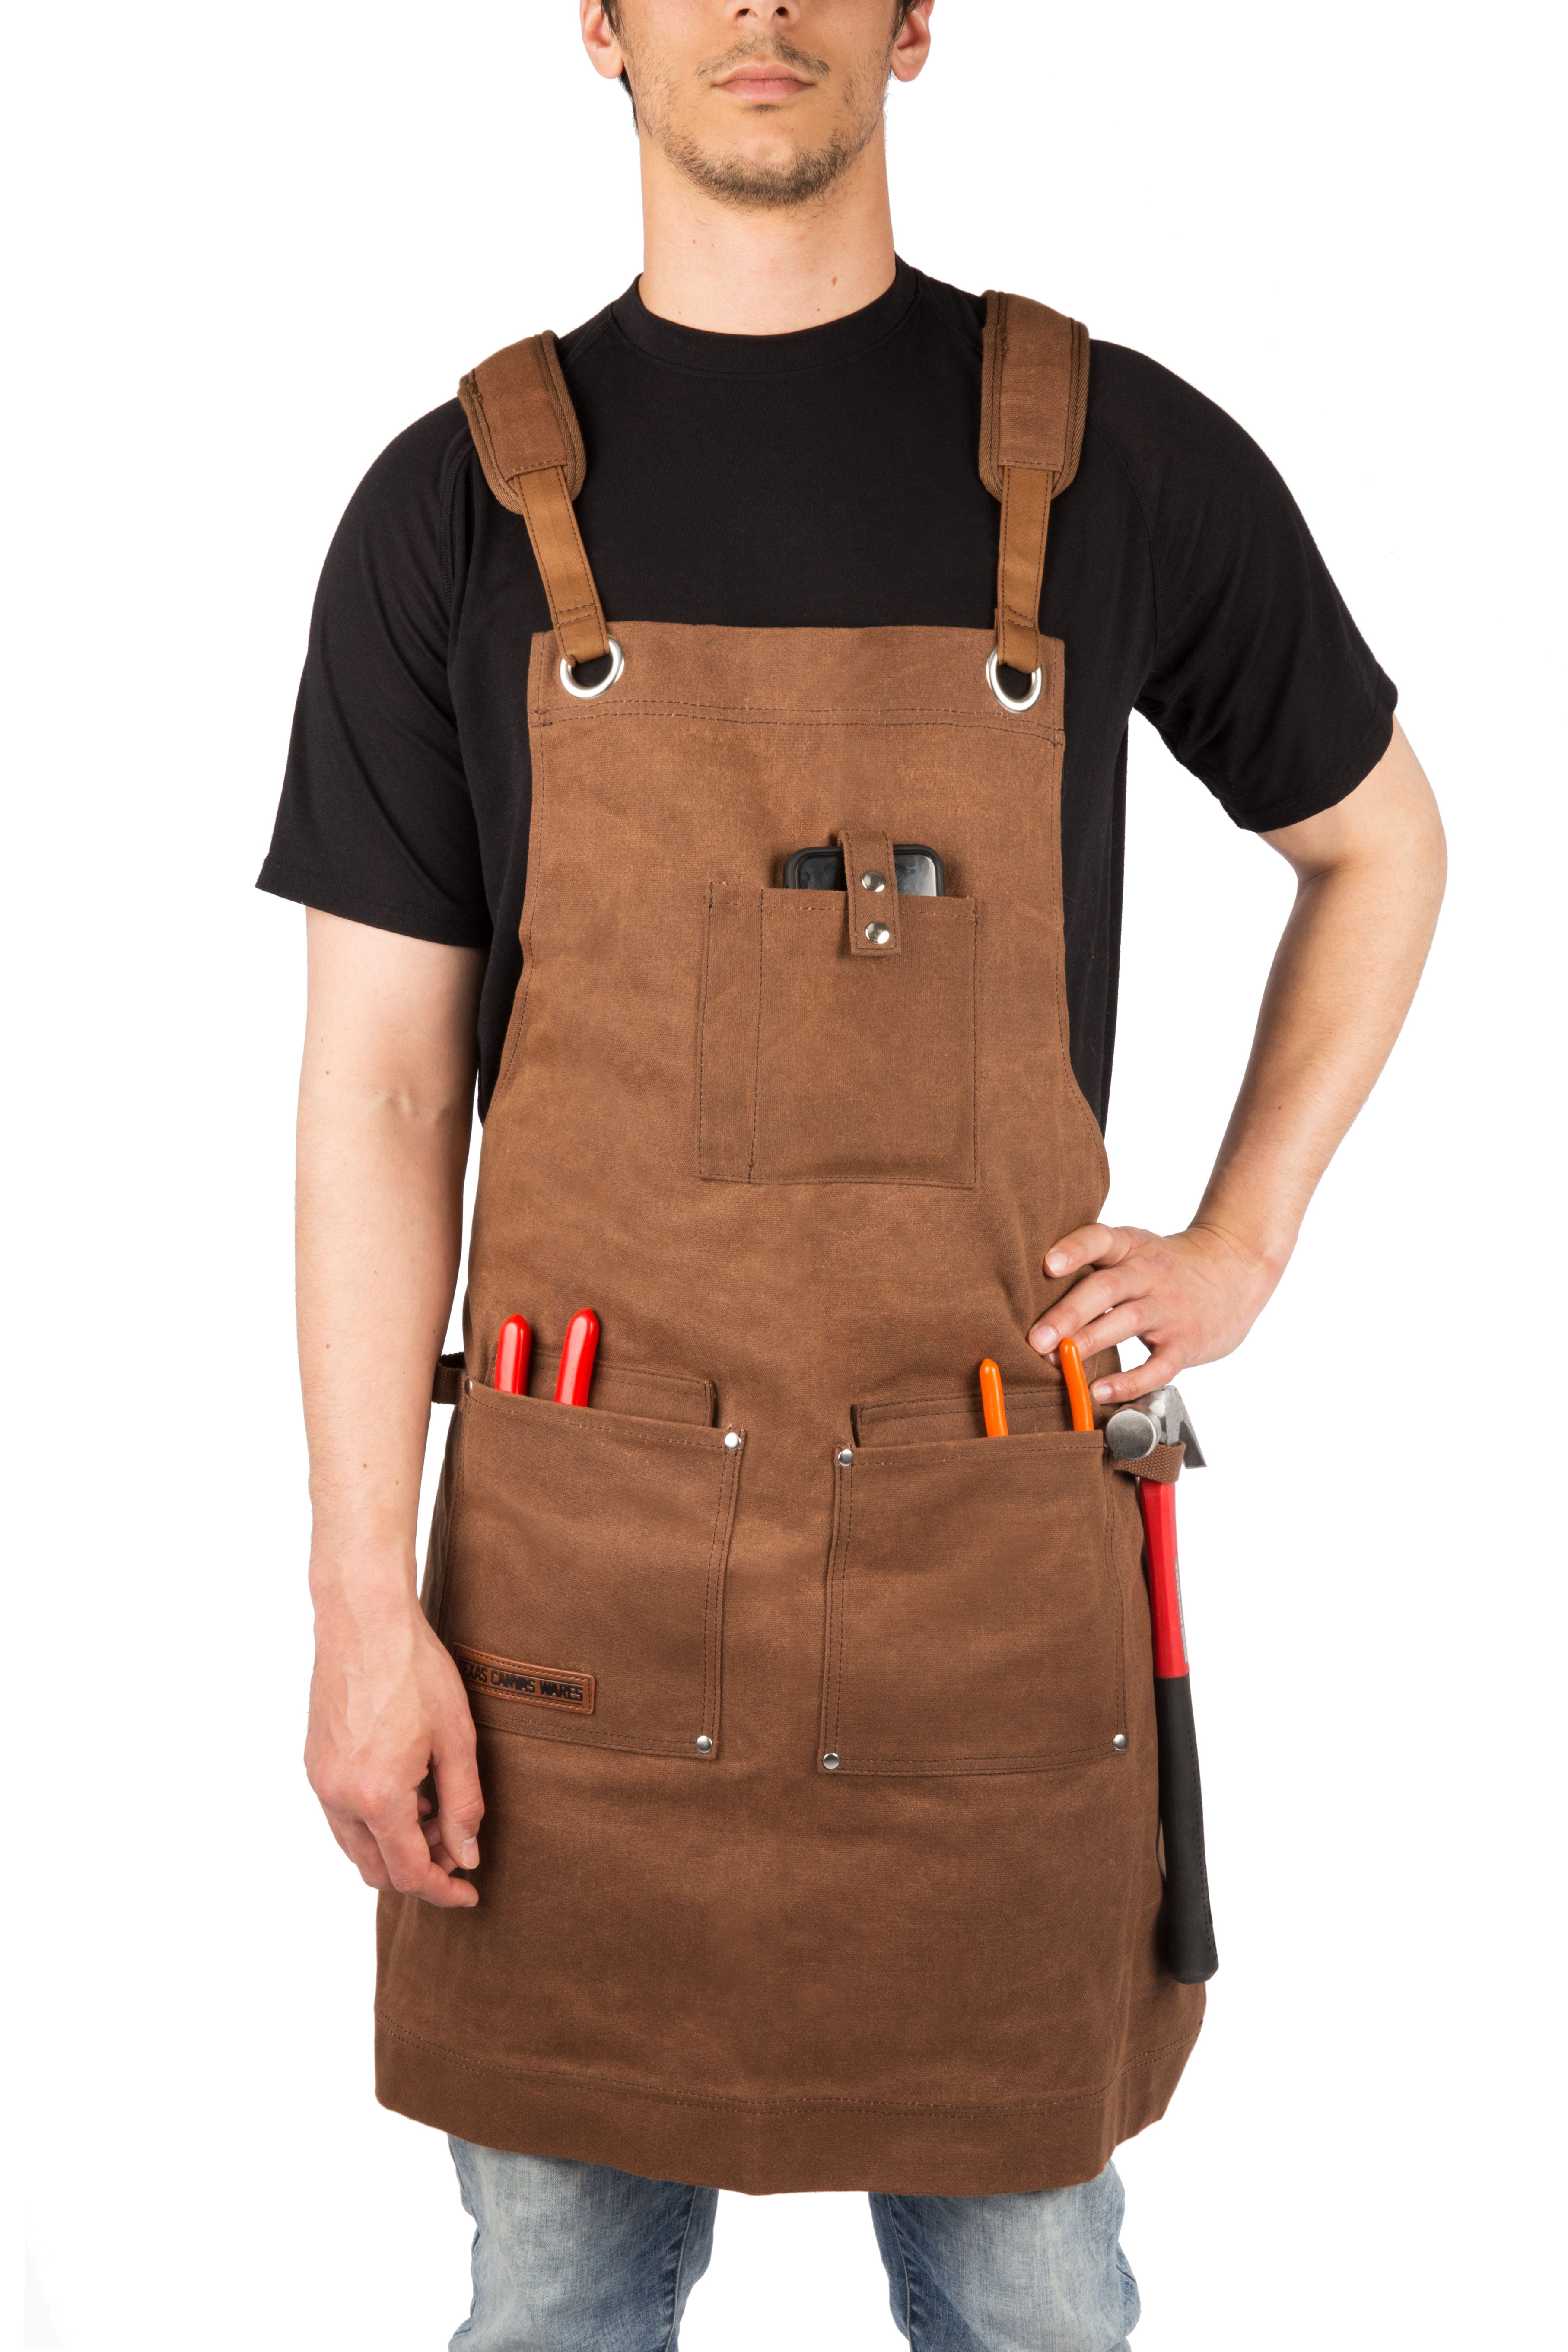 NEW Durable Woodworking Apron for Men 16oz Waxed Canvas Apron with 7 Pockets BRN 